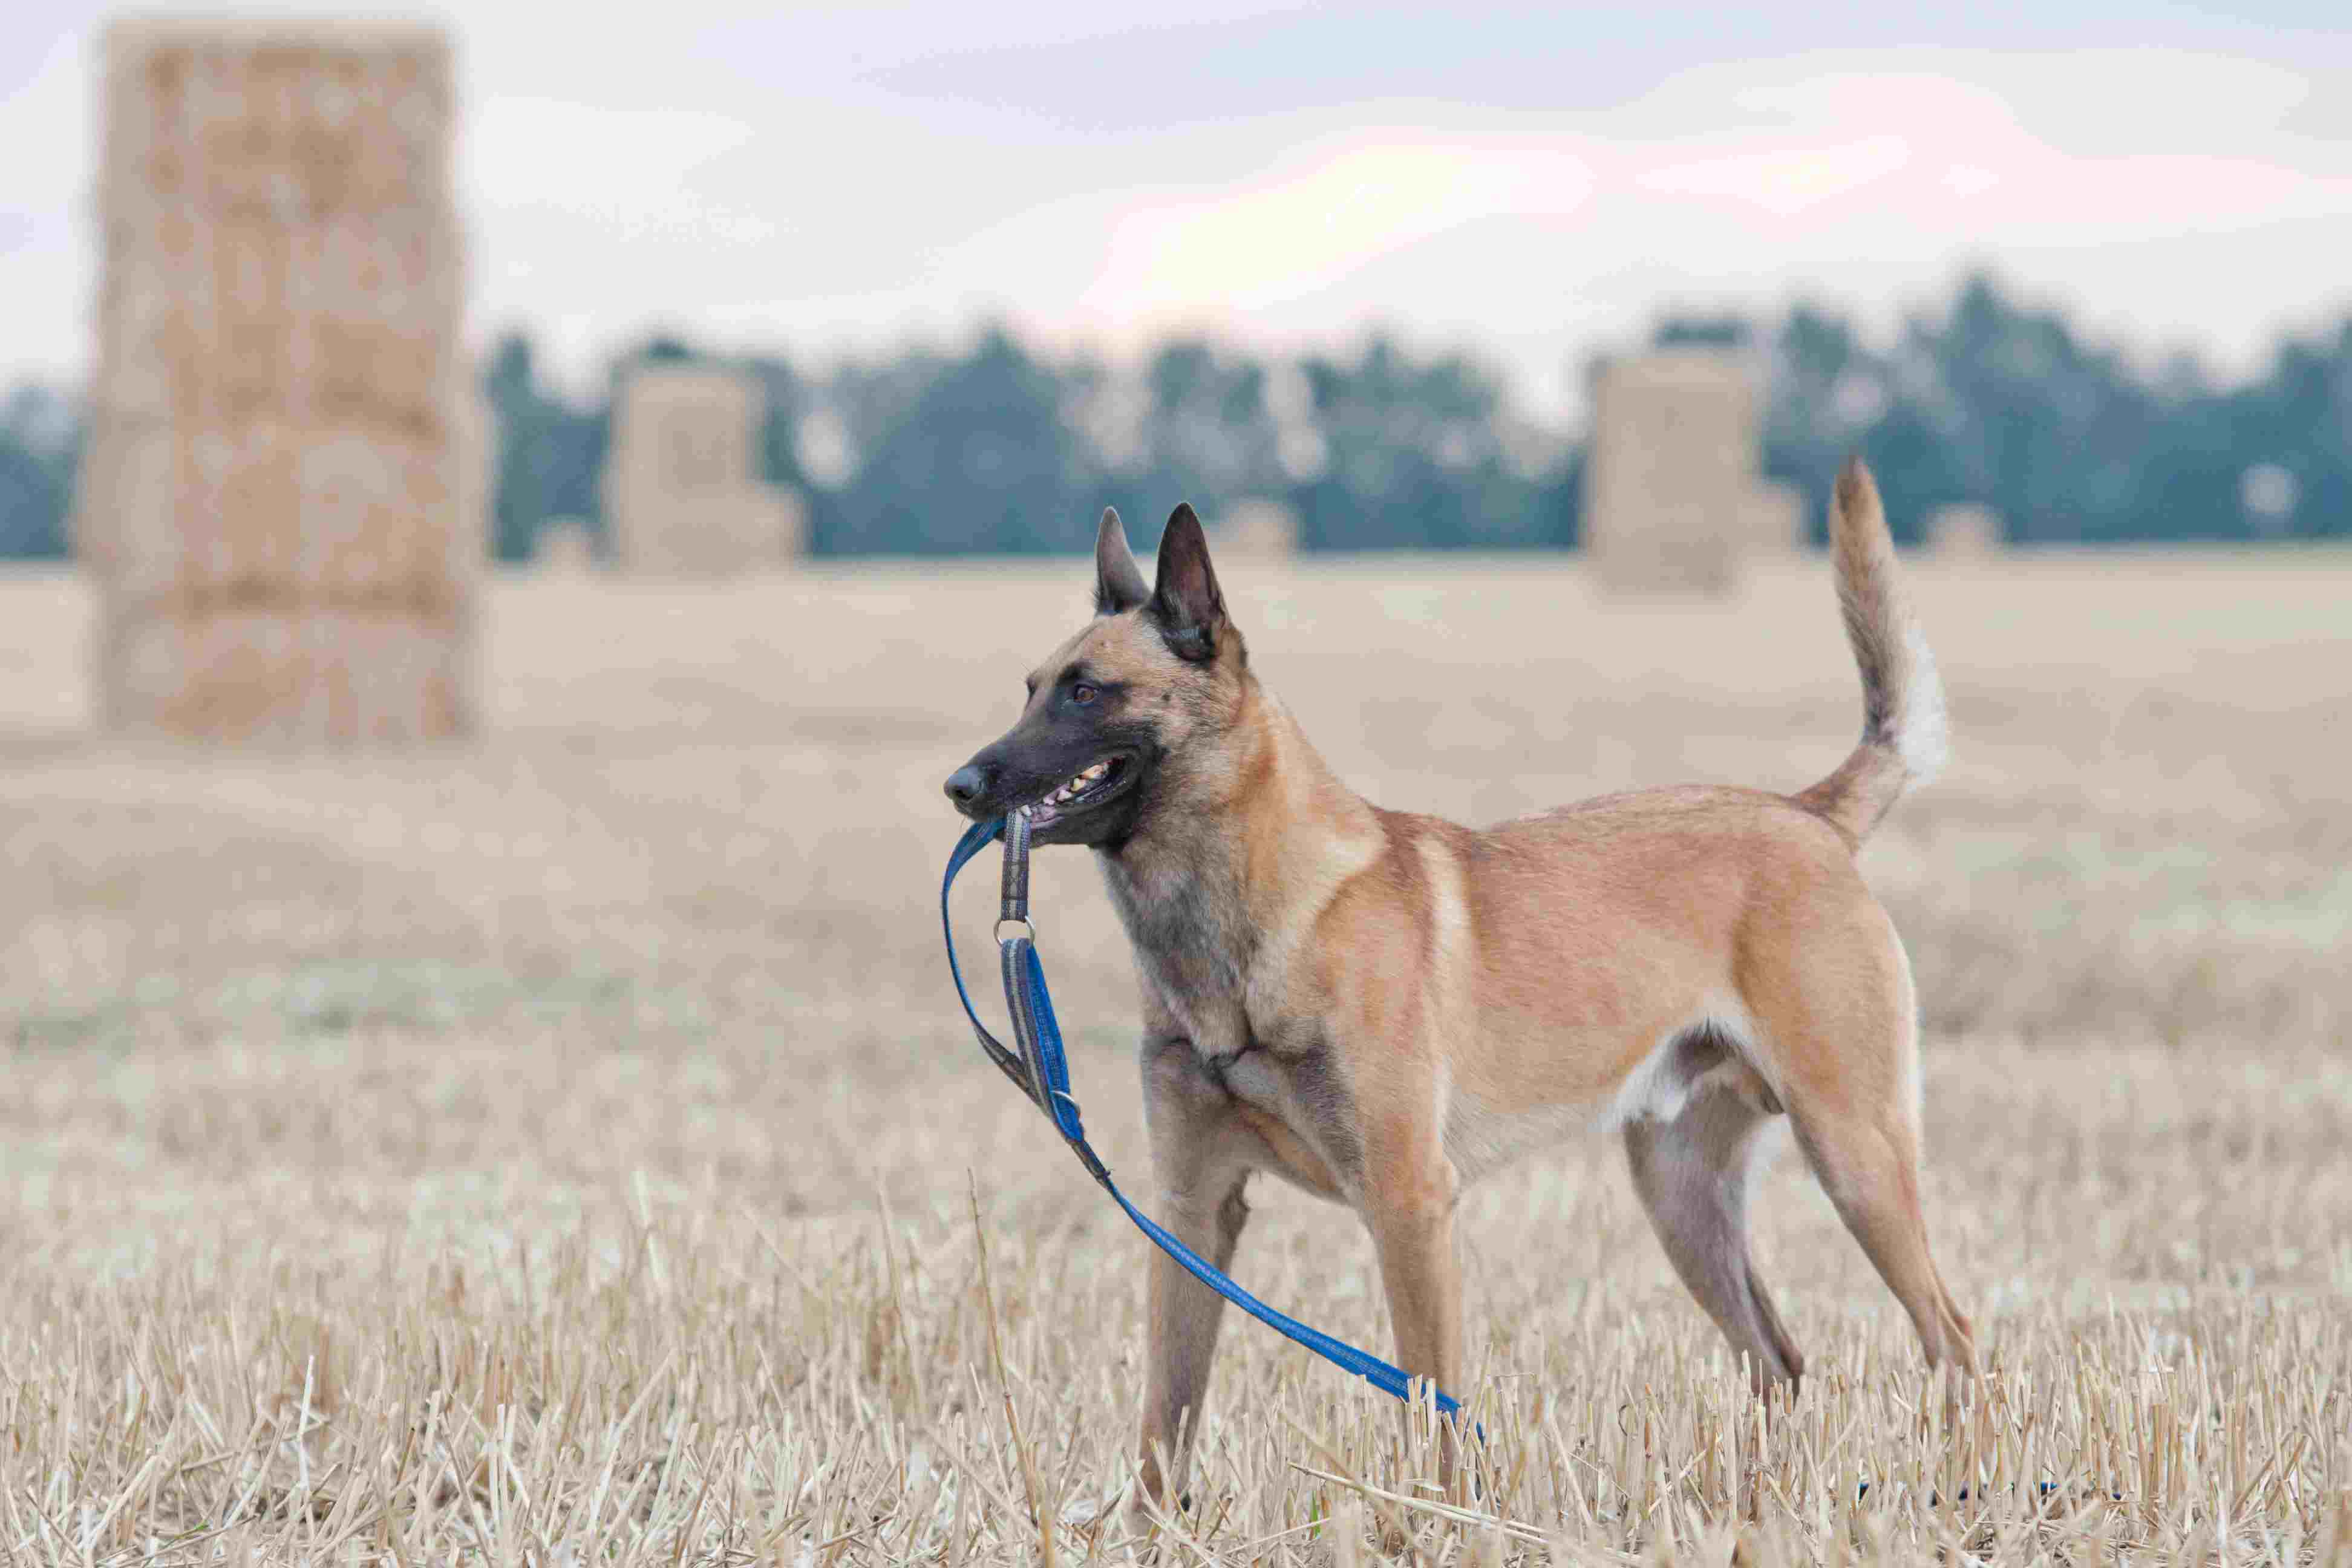 Malinois holding a leash in a field